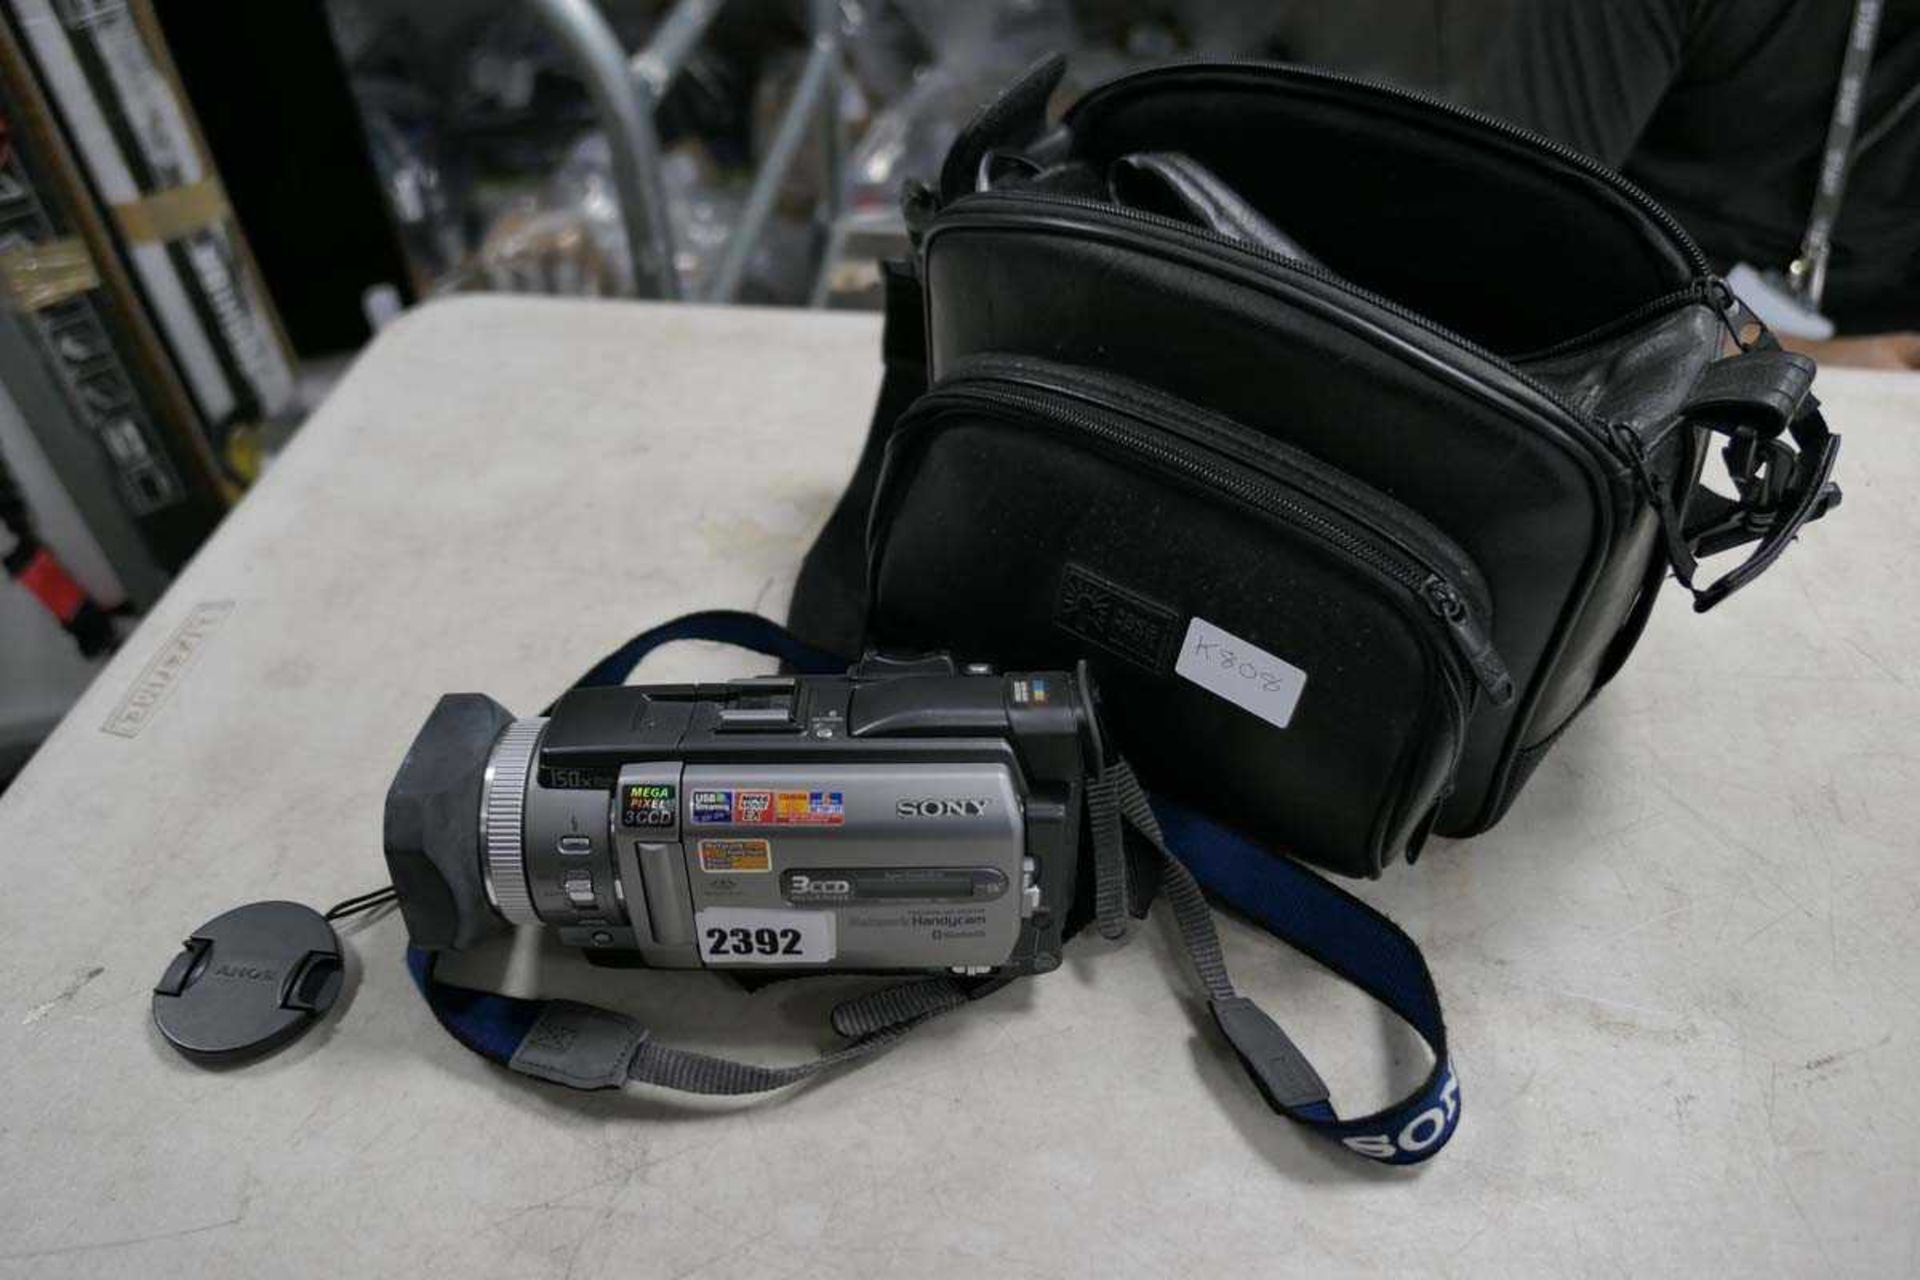 Sony Network Handycam model DCR-TRV950E complete with carry case